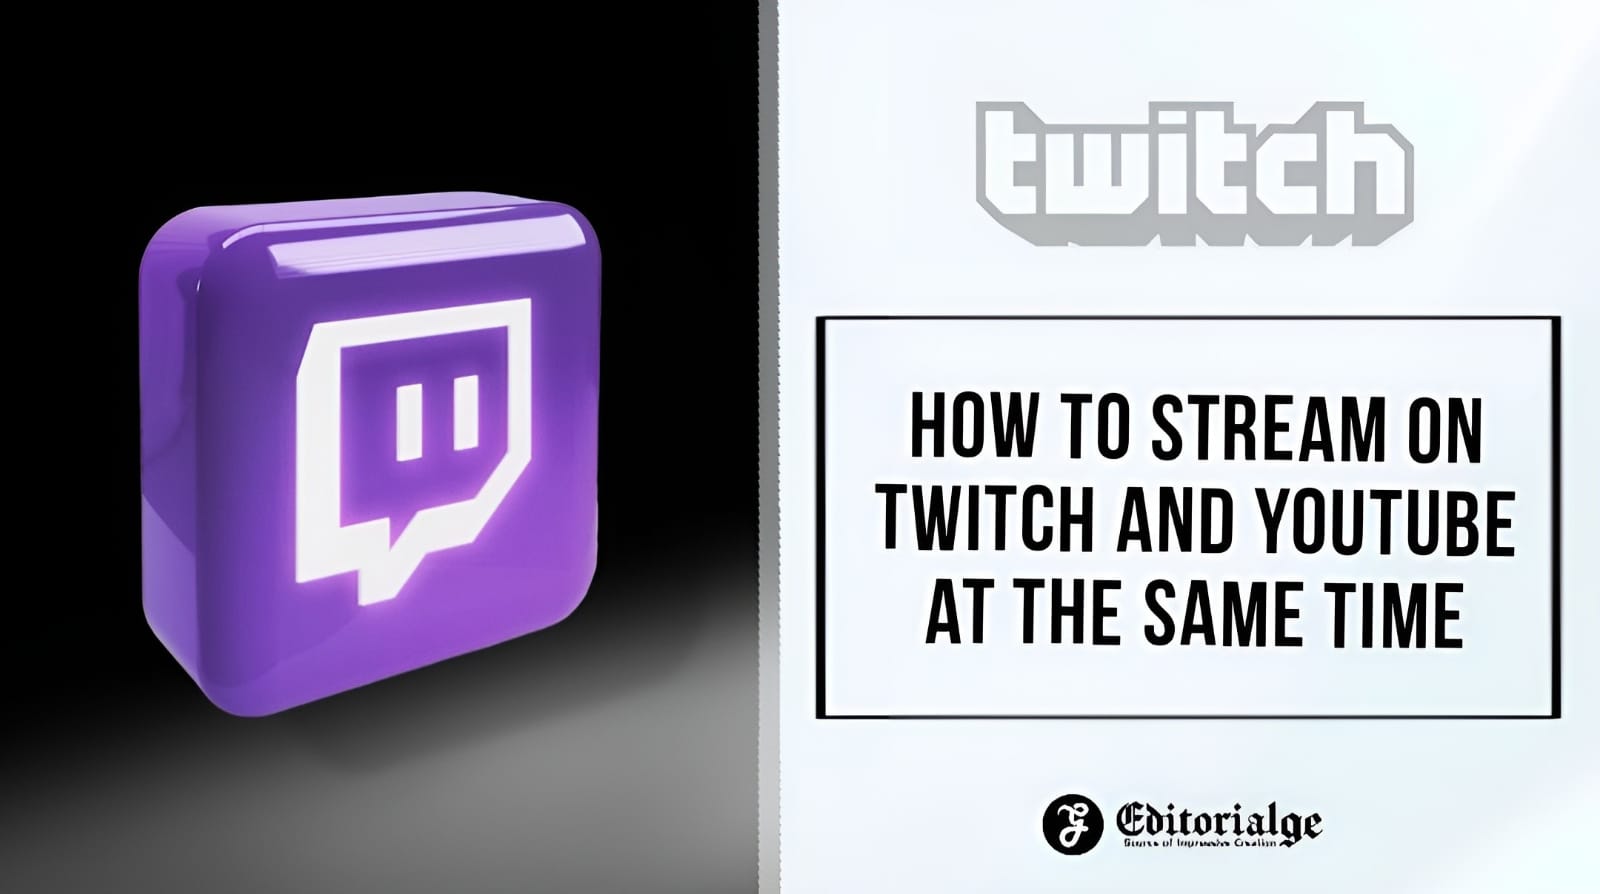 How to stream on twitch and youtube at the same time